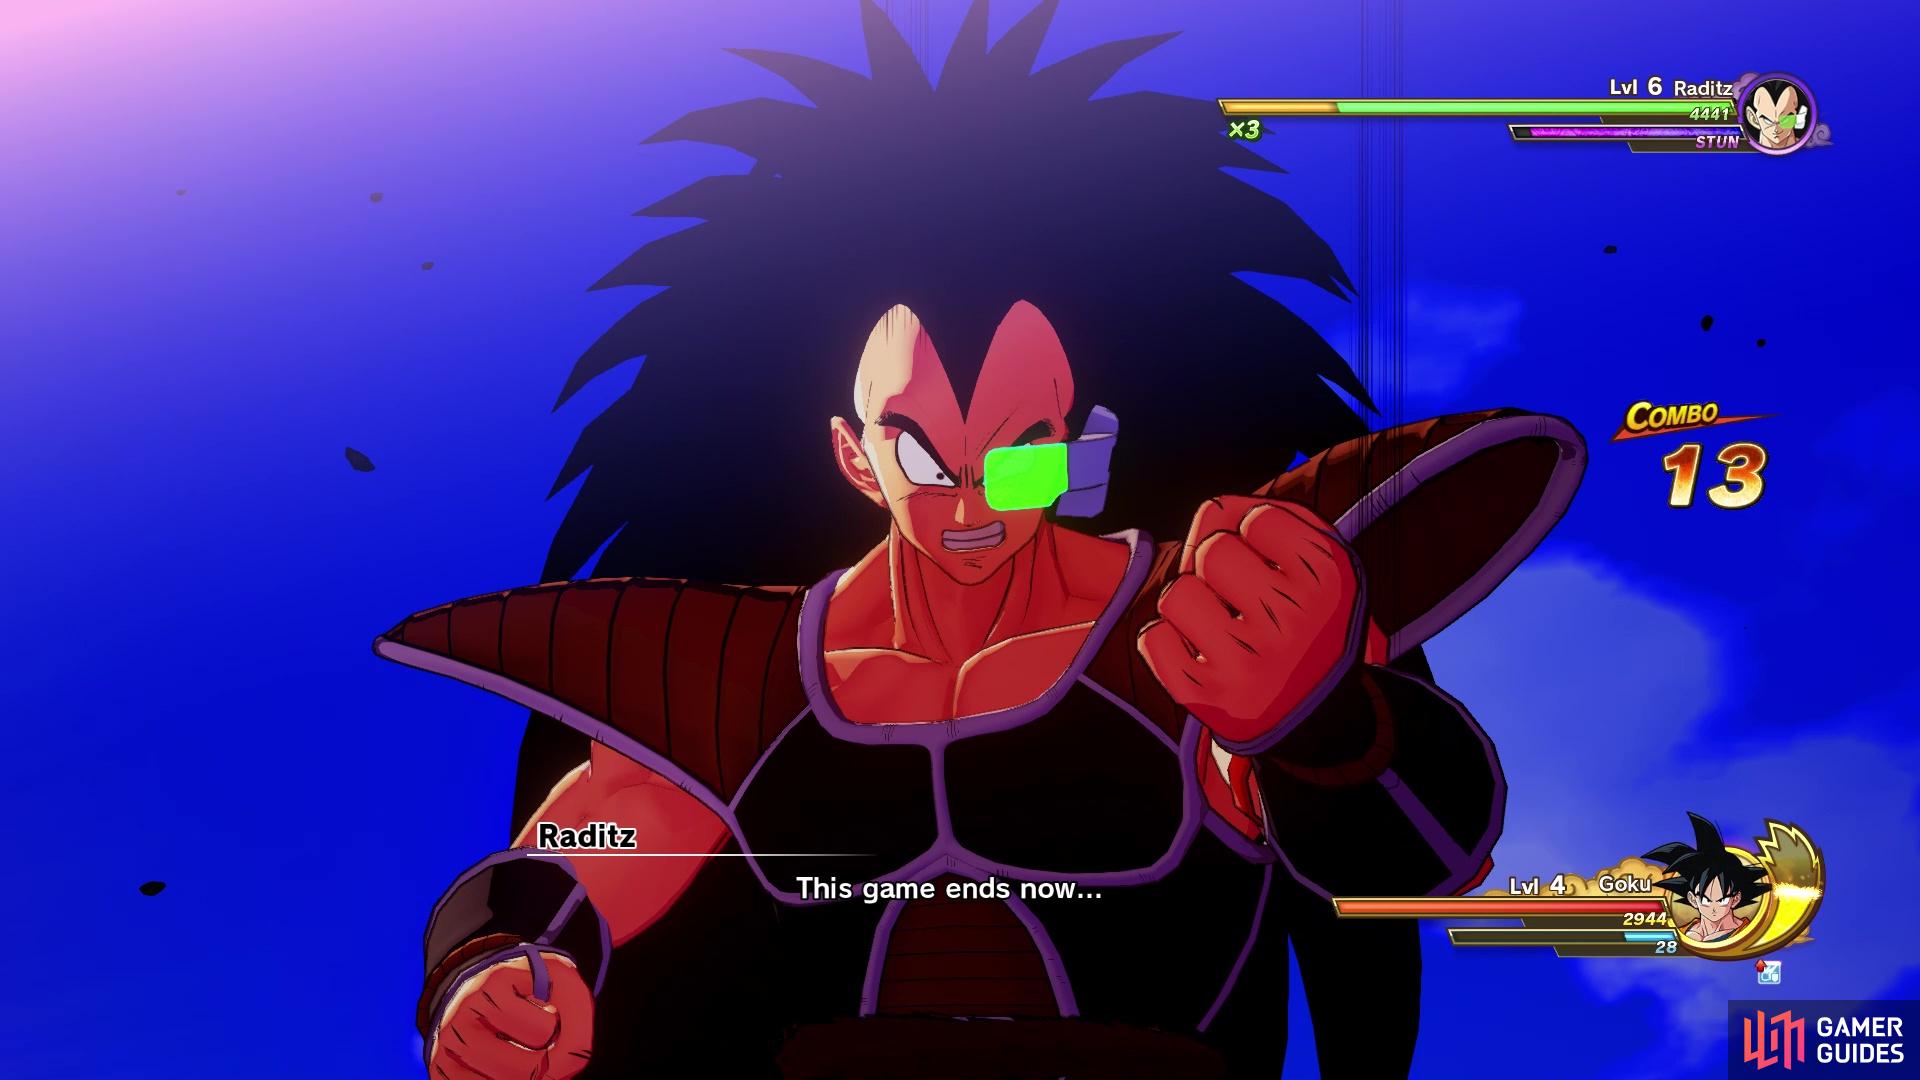 When you see Raditz say this, get ready for his Surge